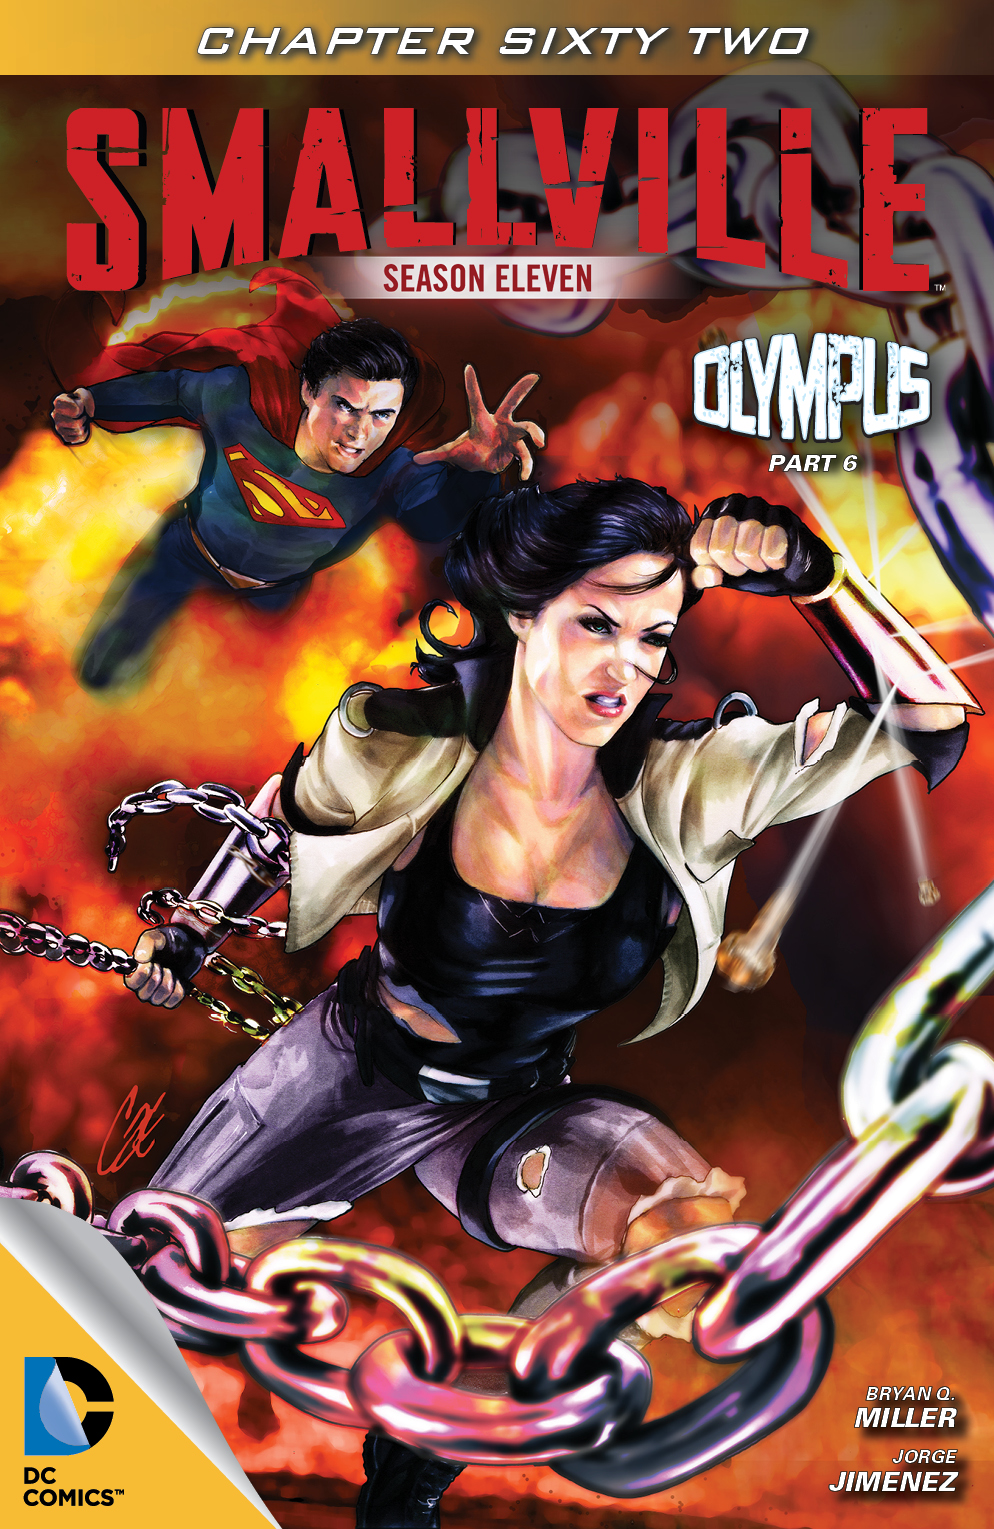 Smallville Season 11 #62 preview images